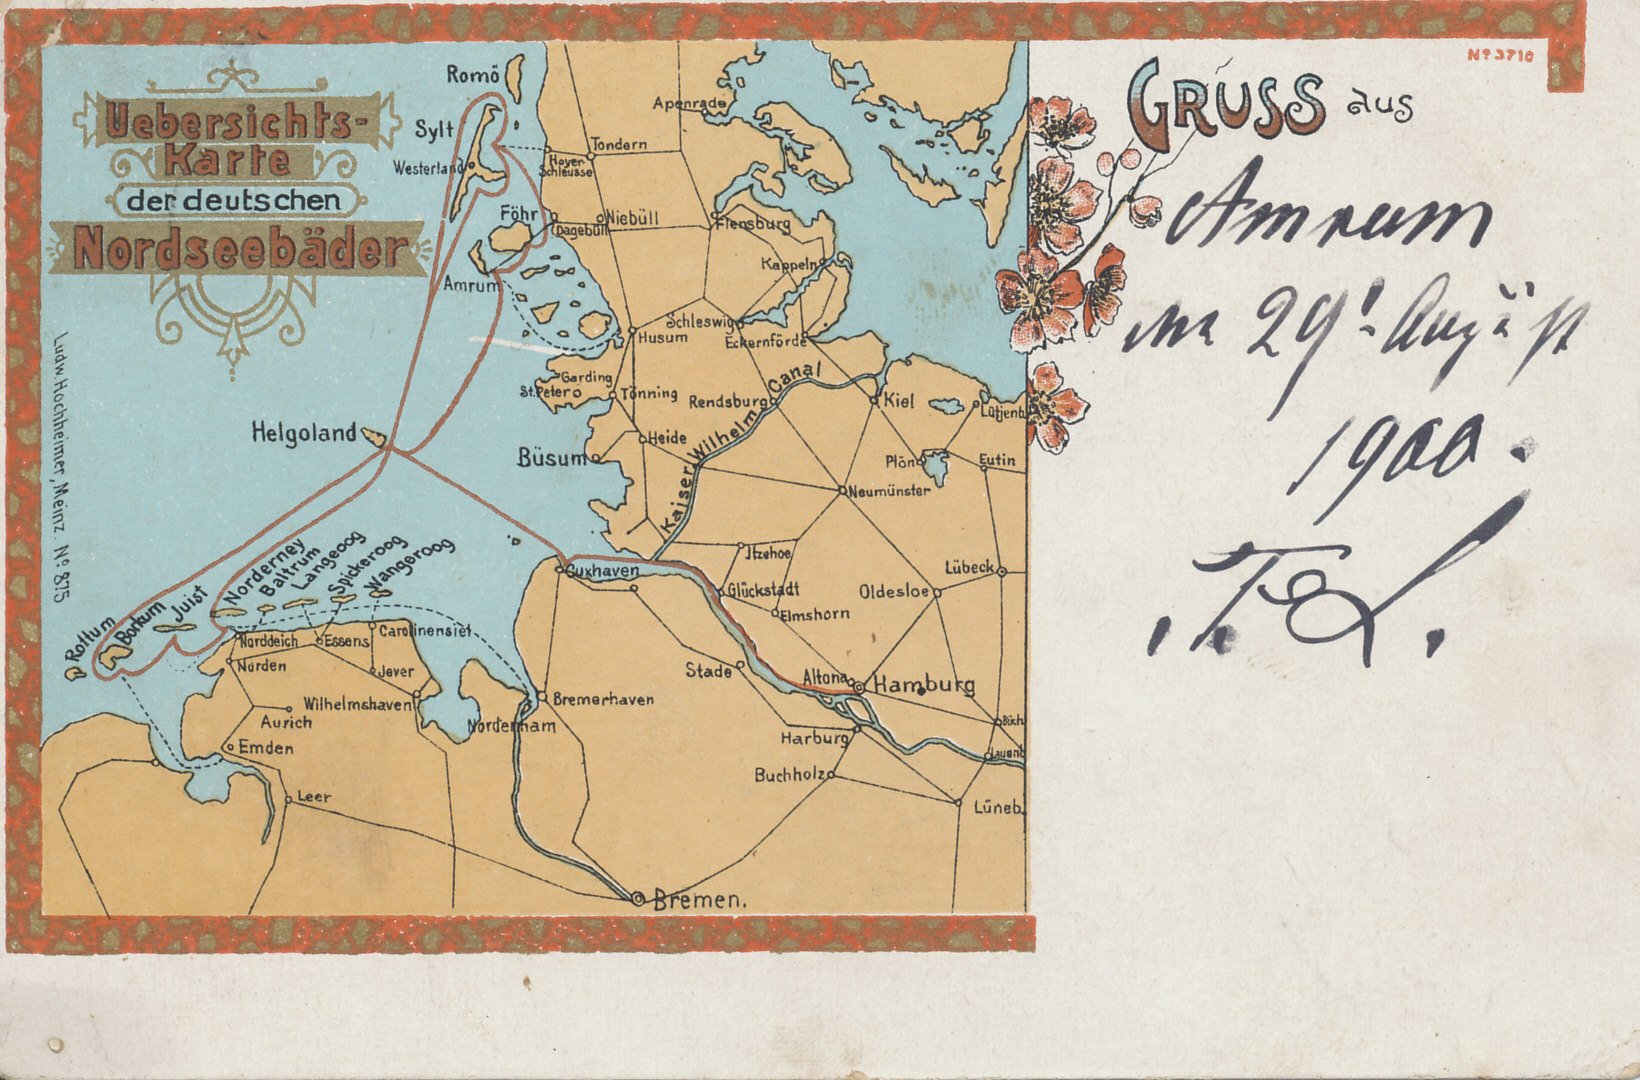 Postcard map of the German beach resorts on the North Sea with ferry routes connecting Hamburg and Cuxhaven on the mainland with the island of Helgoland and, from there, Sylt and Amrum to the north, and Borkum, Juist, and Norderney to the south. The map also shows the Kaiser Wilhelm Canal connecting Kiel, a home to Germany's Baltic Fleet, with the estuary of the Elbe River on the North Sea.
Title: Uebersichtskarte der deutschen Nordseebäder (Overview map of the German North Sea Baths)
[Printed]
Gruss aus (Greetings from)
[Handwritten] Amrum 29 August 1900
Ludw. Hochheimer, Meinz, No. 875
Reverse:
Deutsche Reichspost Postkarte